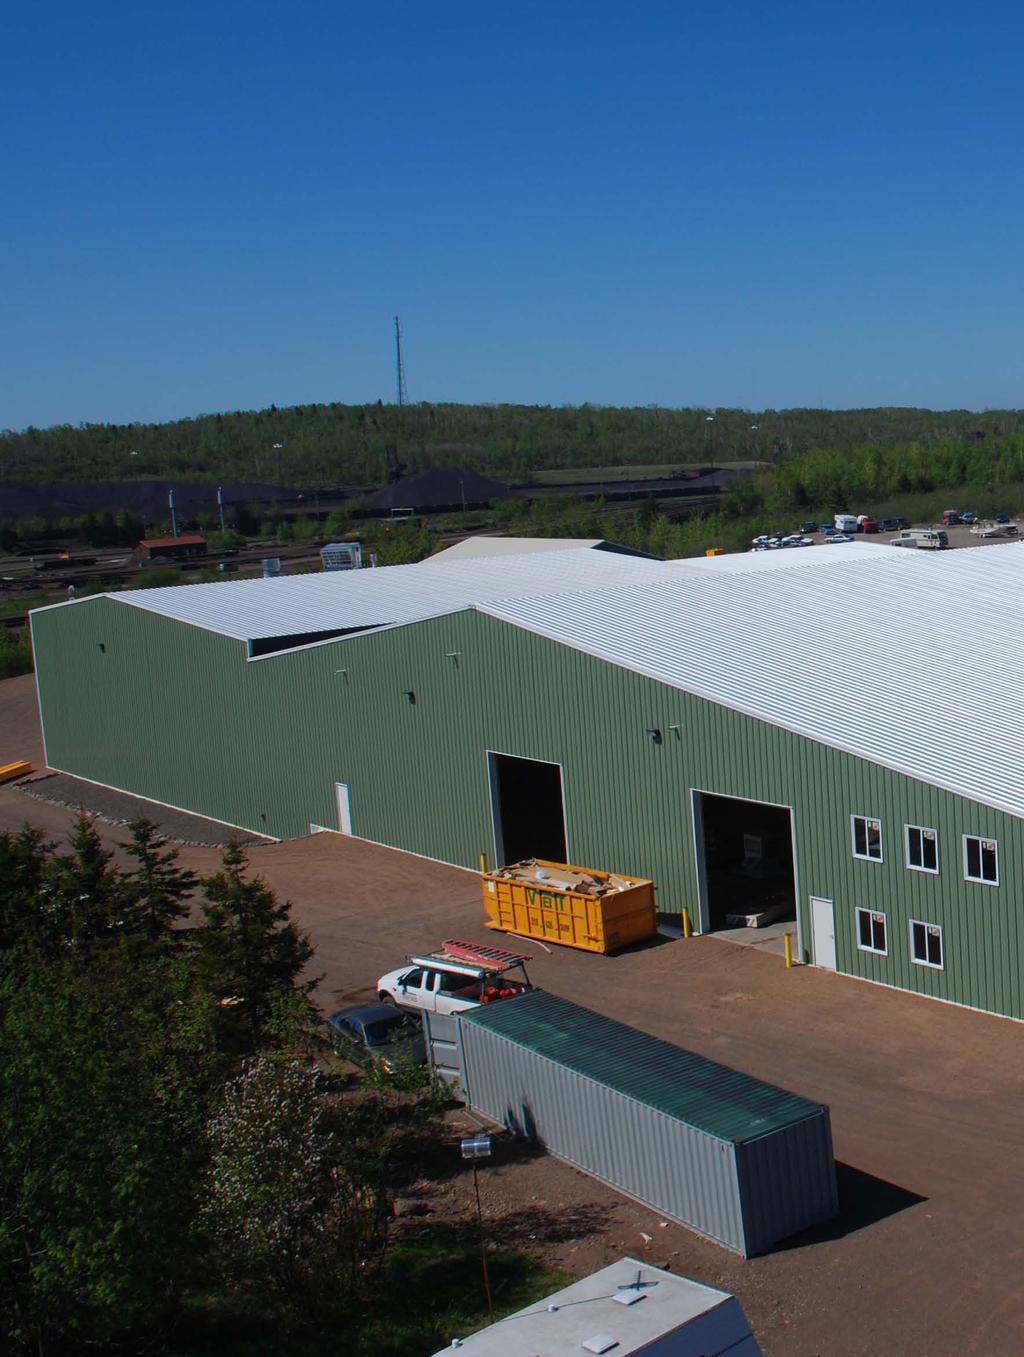 Since 1989, North Shore Manufacturing has been providing productive, material handling solutions for a wide variety of industries including scrap recycling, solid waste handling, mining, forestry,